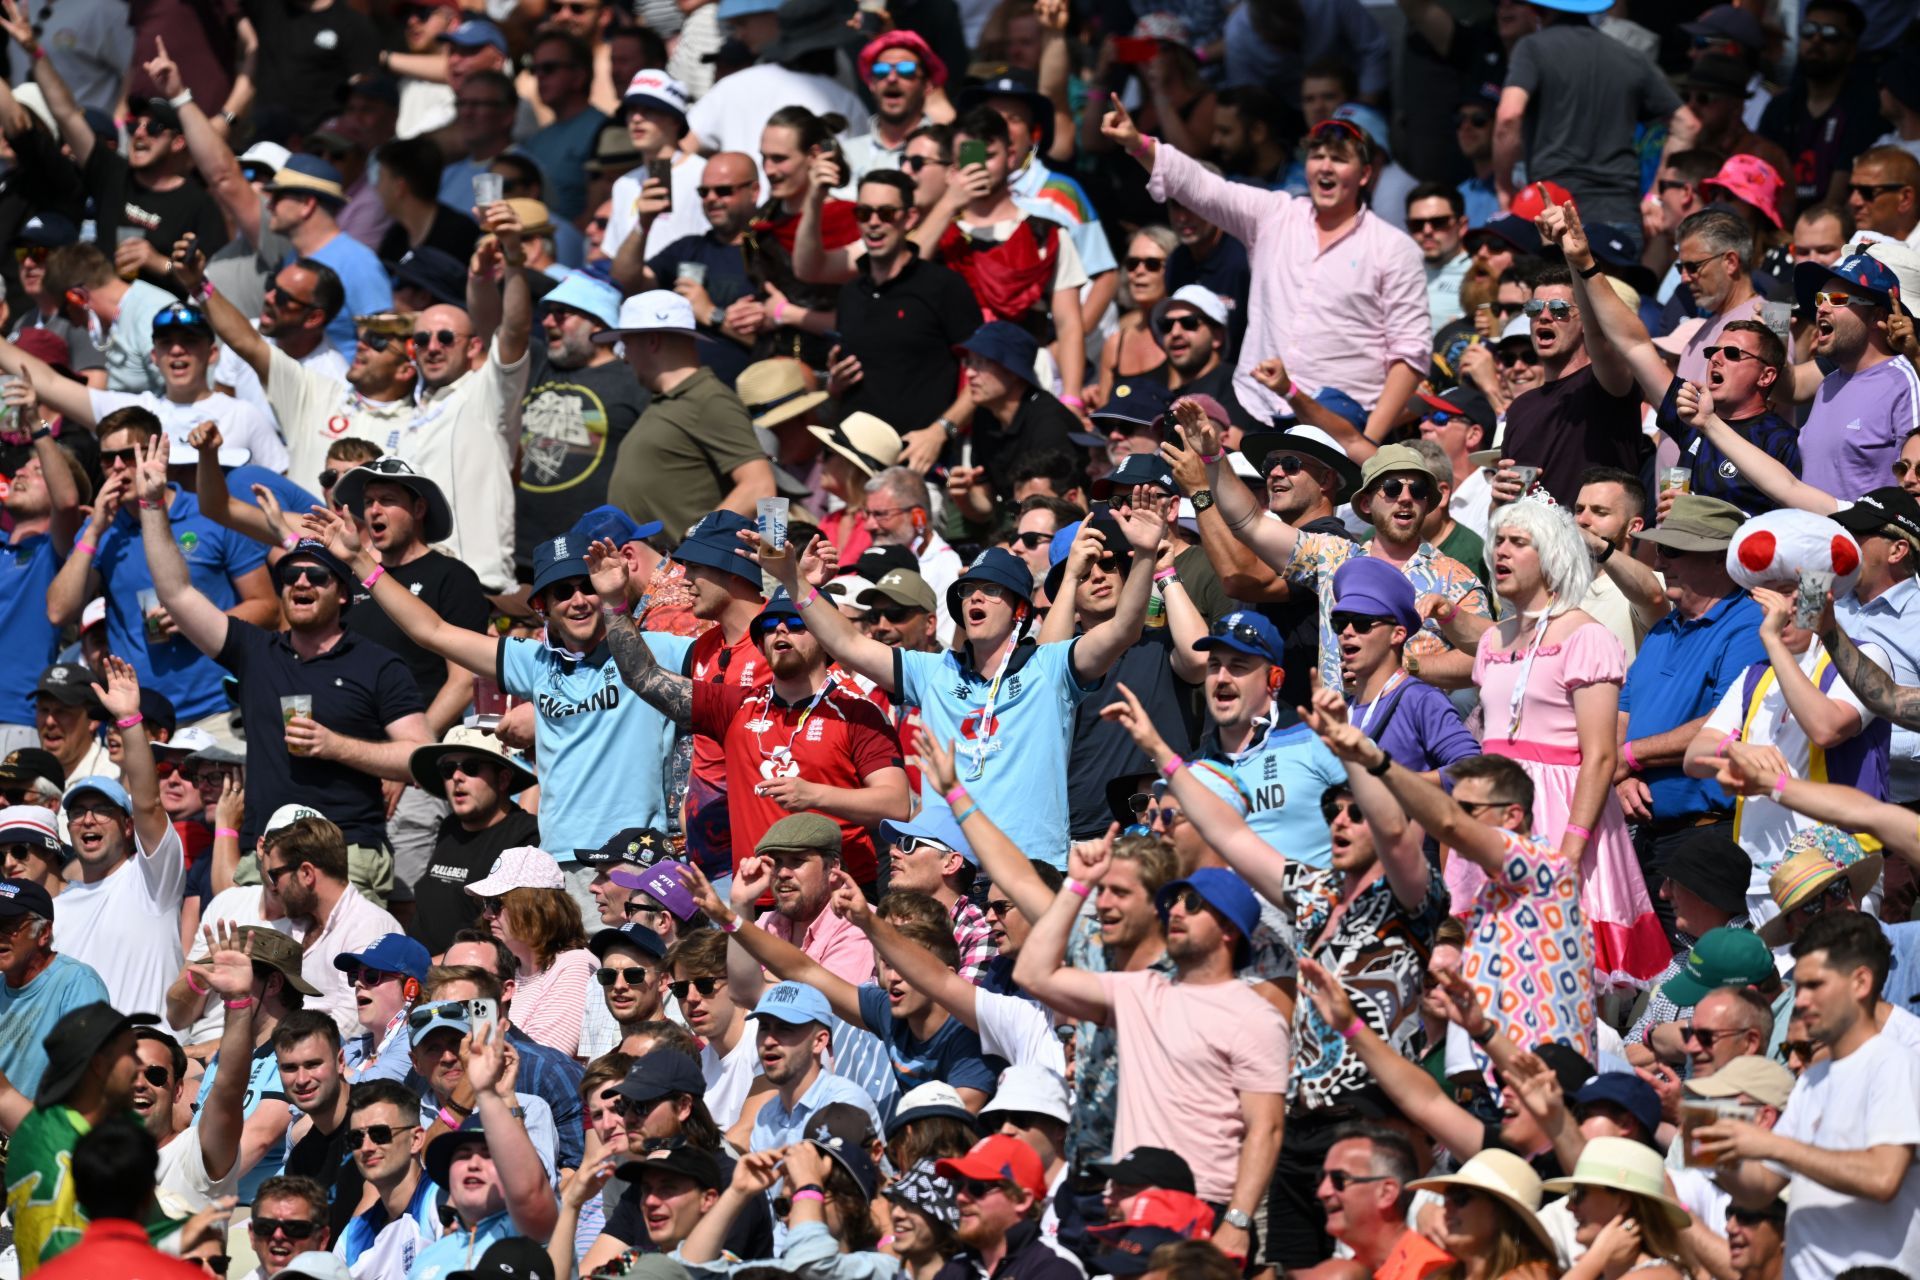 The crowd at Edgbaston during 1st Ashes Test. (Credits: Getty)